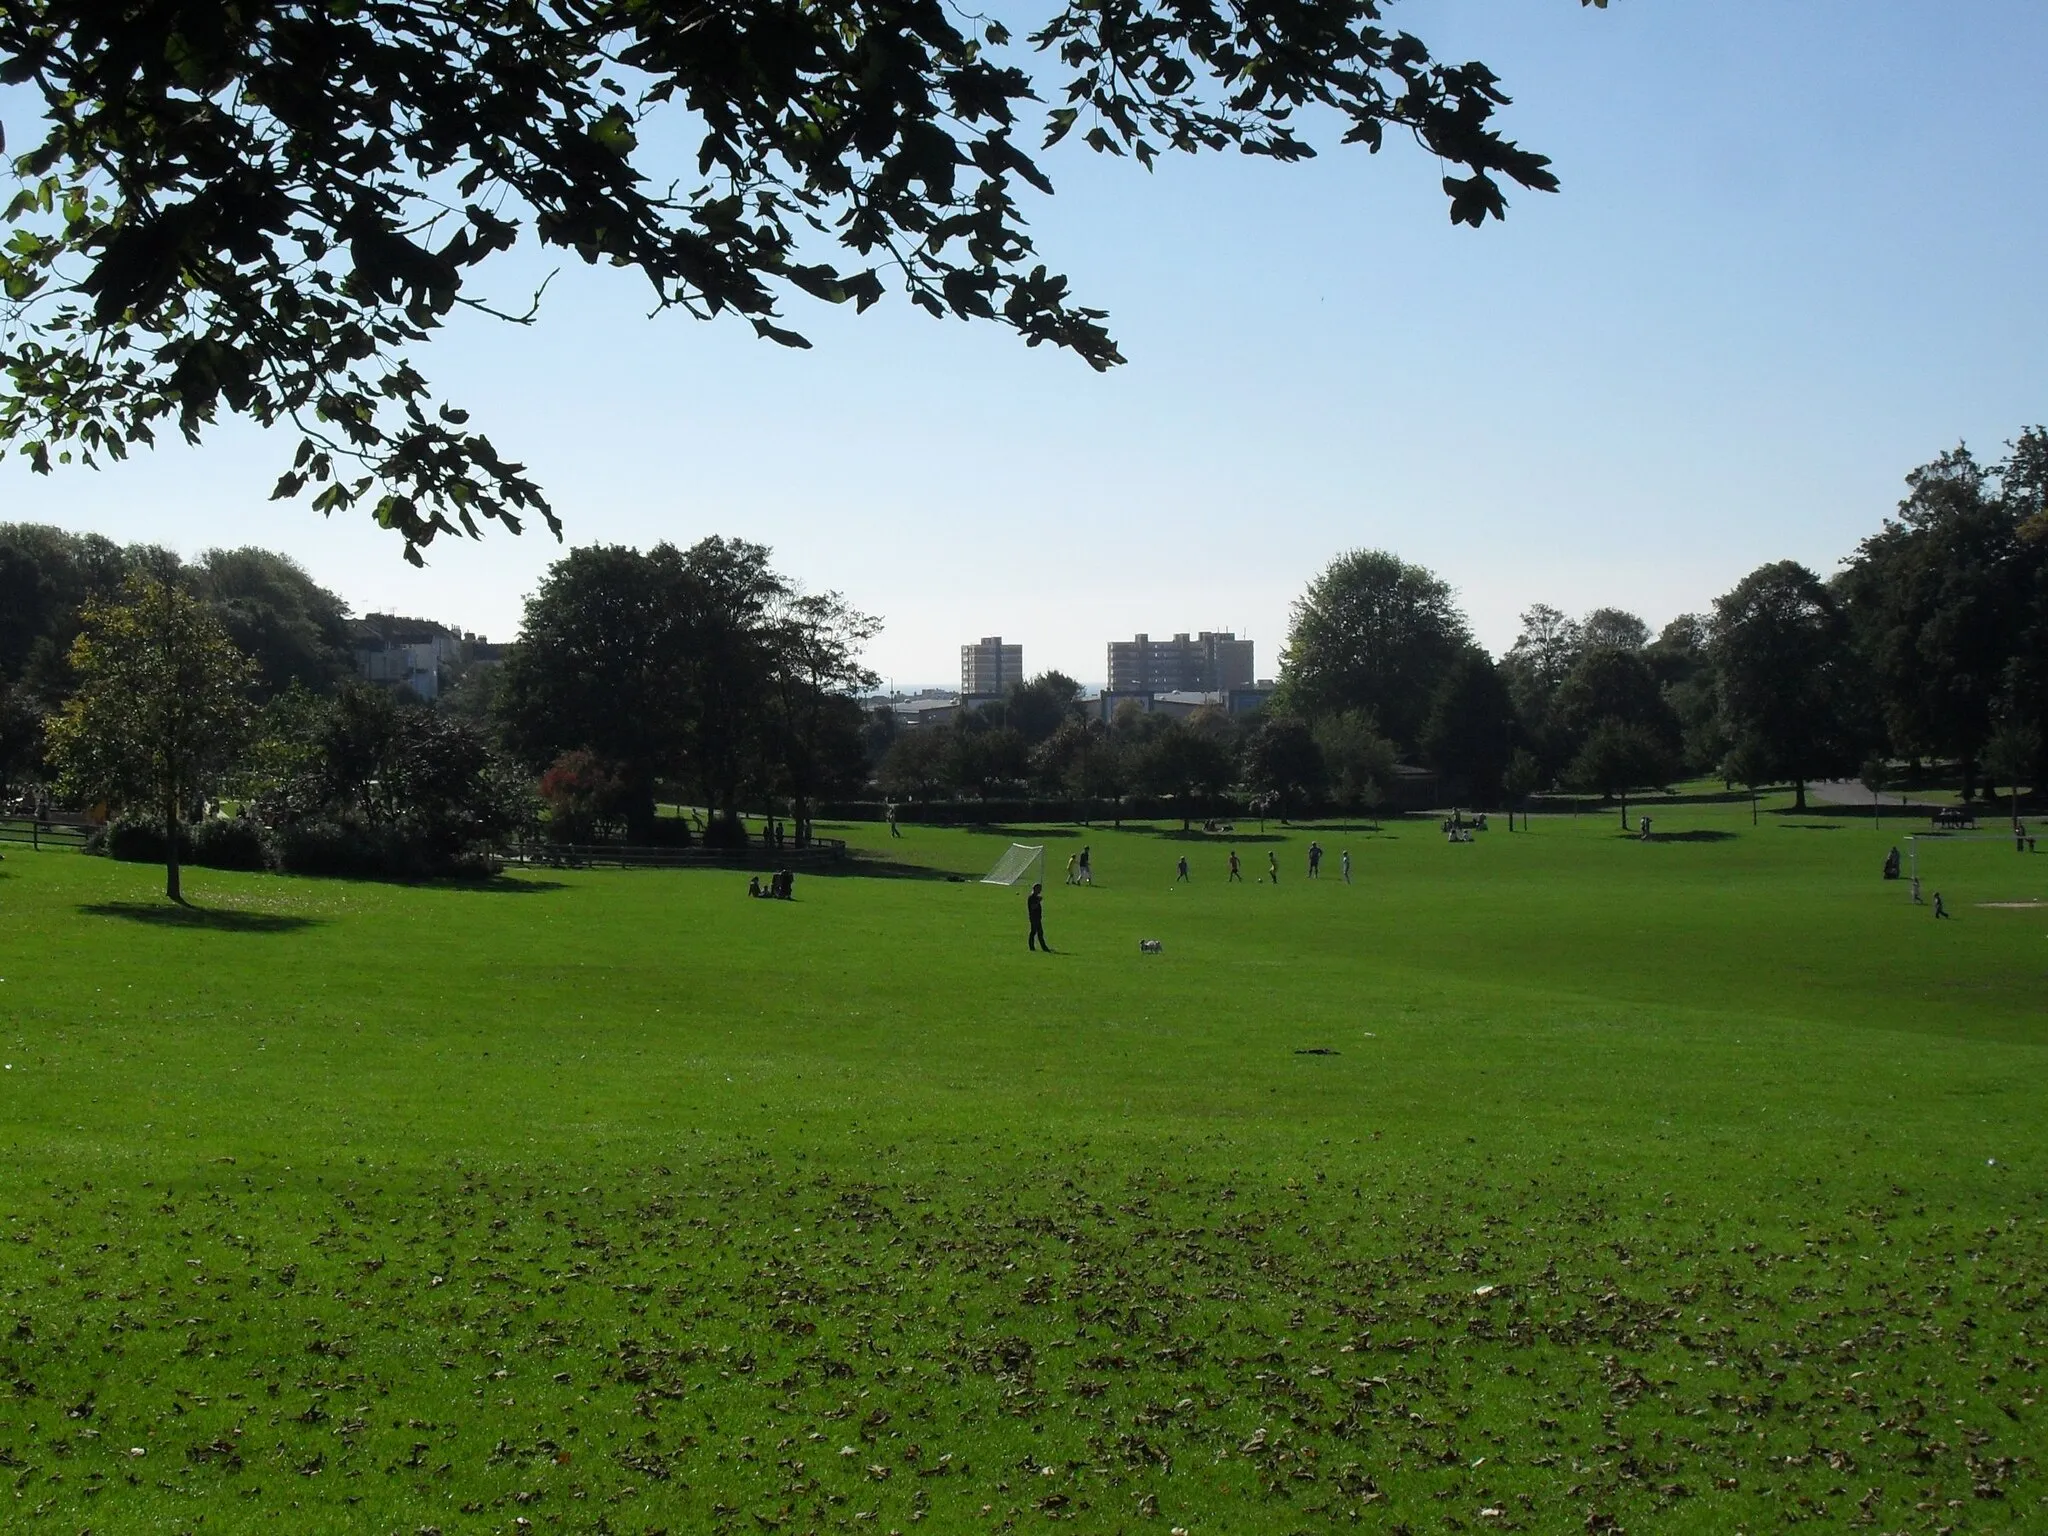 Photo showing: A southward view across Hove Park in Hove, part of the English city of Brighton and Hove.  The English Channel can be seen in the distance.